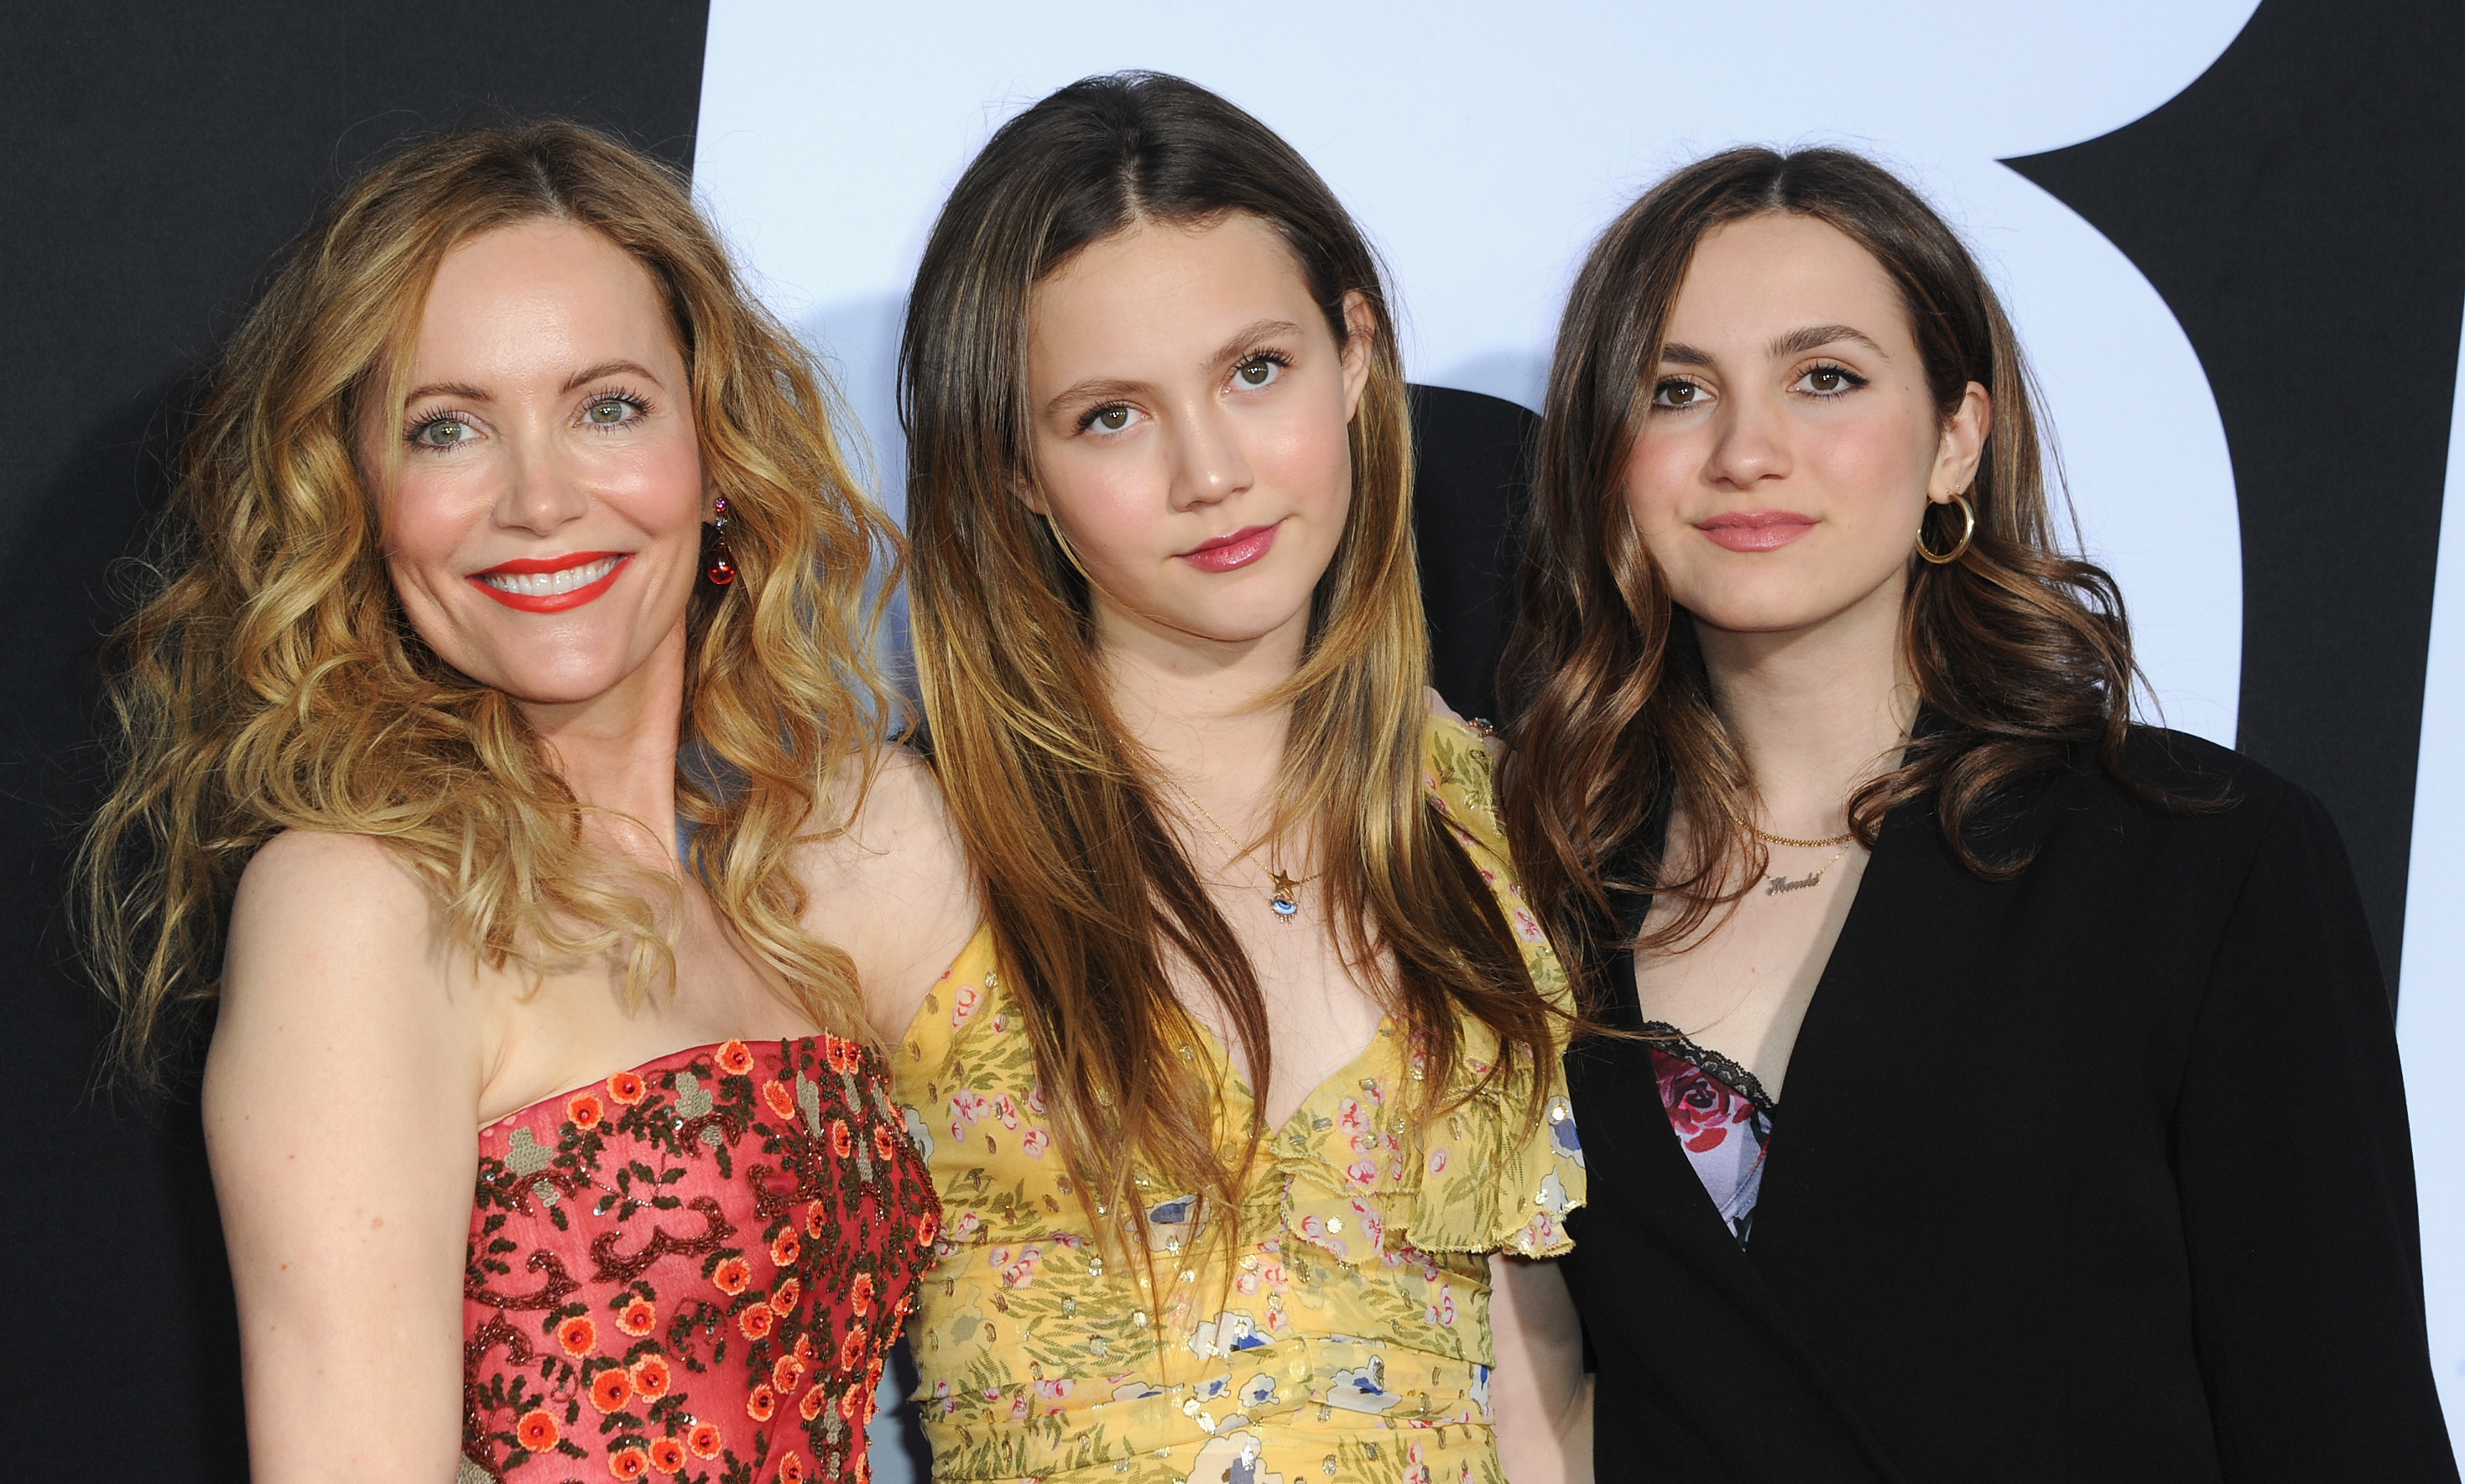 Leslie Mann Says Her Daughter Maude Apatow Doesn't Listen To Her Acting